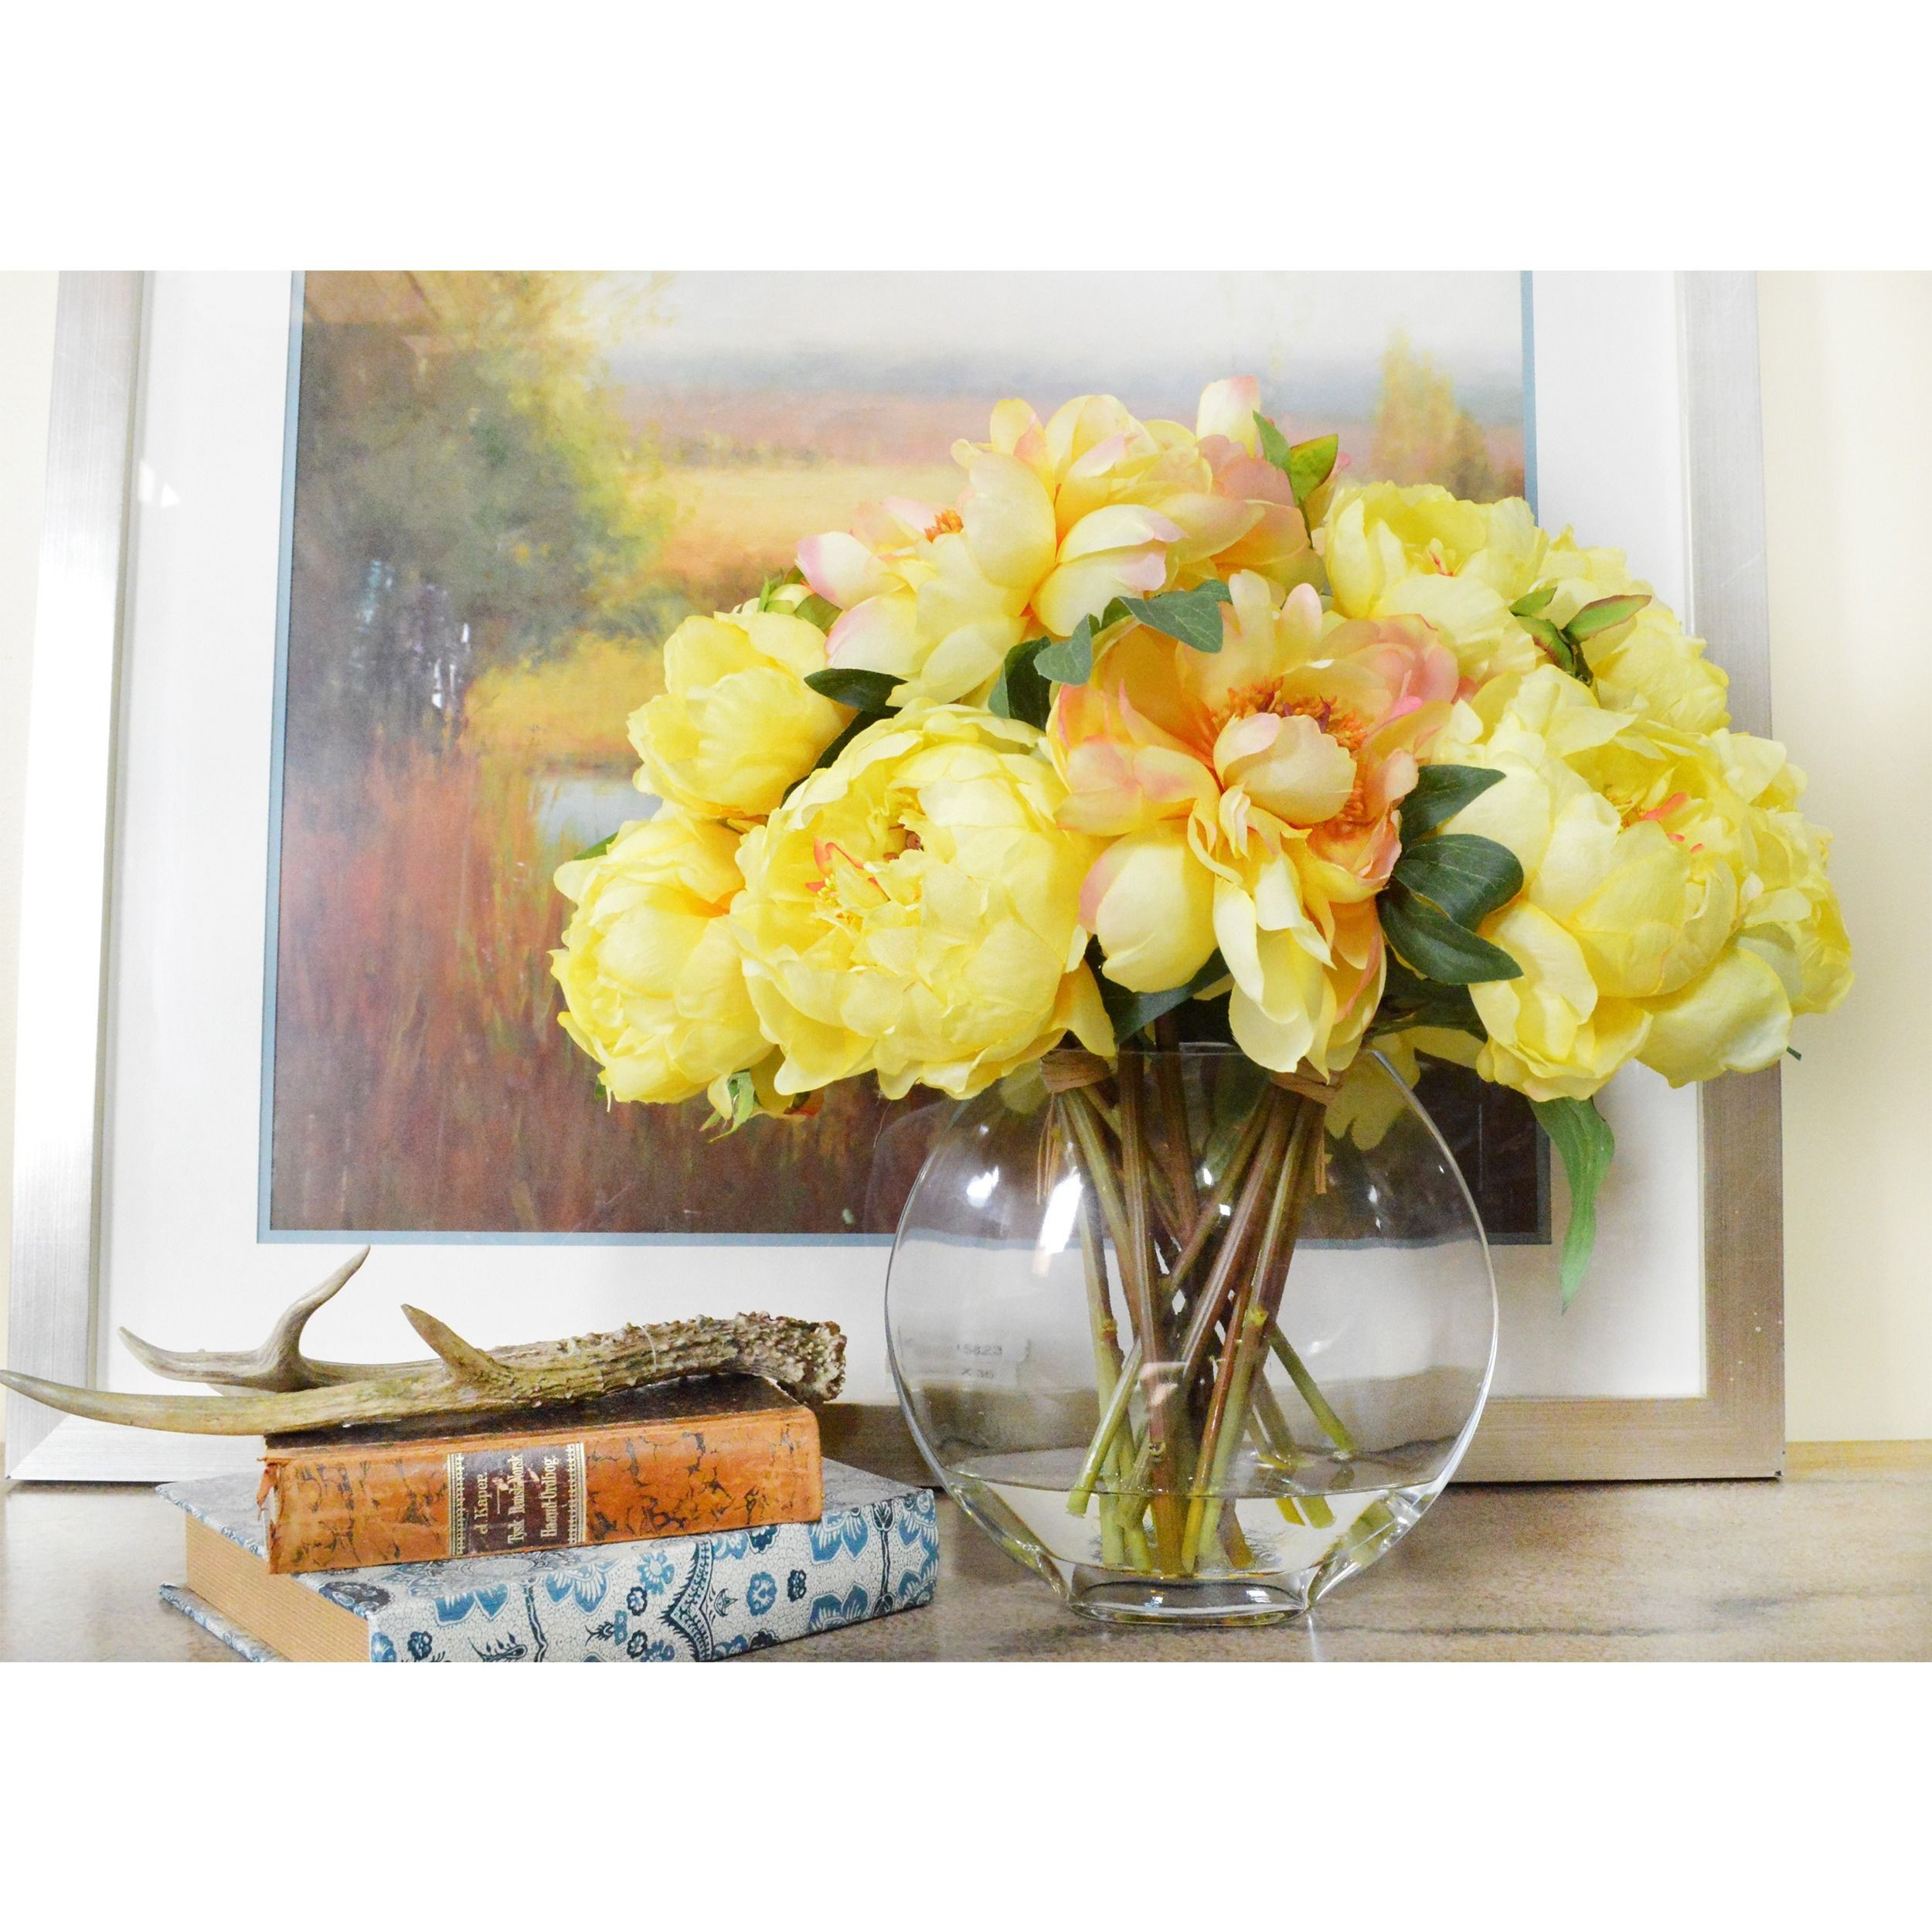 20 Great Round Mercury Glass Vase 2024 free download round mercury glass vase of creative displays bouquet of yellow peonies in a round acrylic for creative displays bouquet of yellow peonies in a round acrylic water filled glass vase 22 w x 2